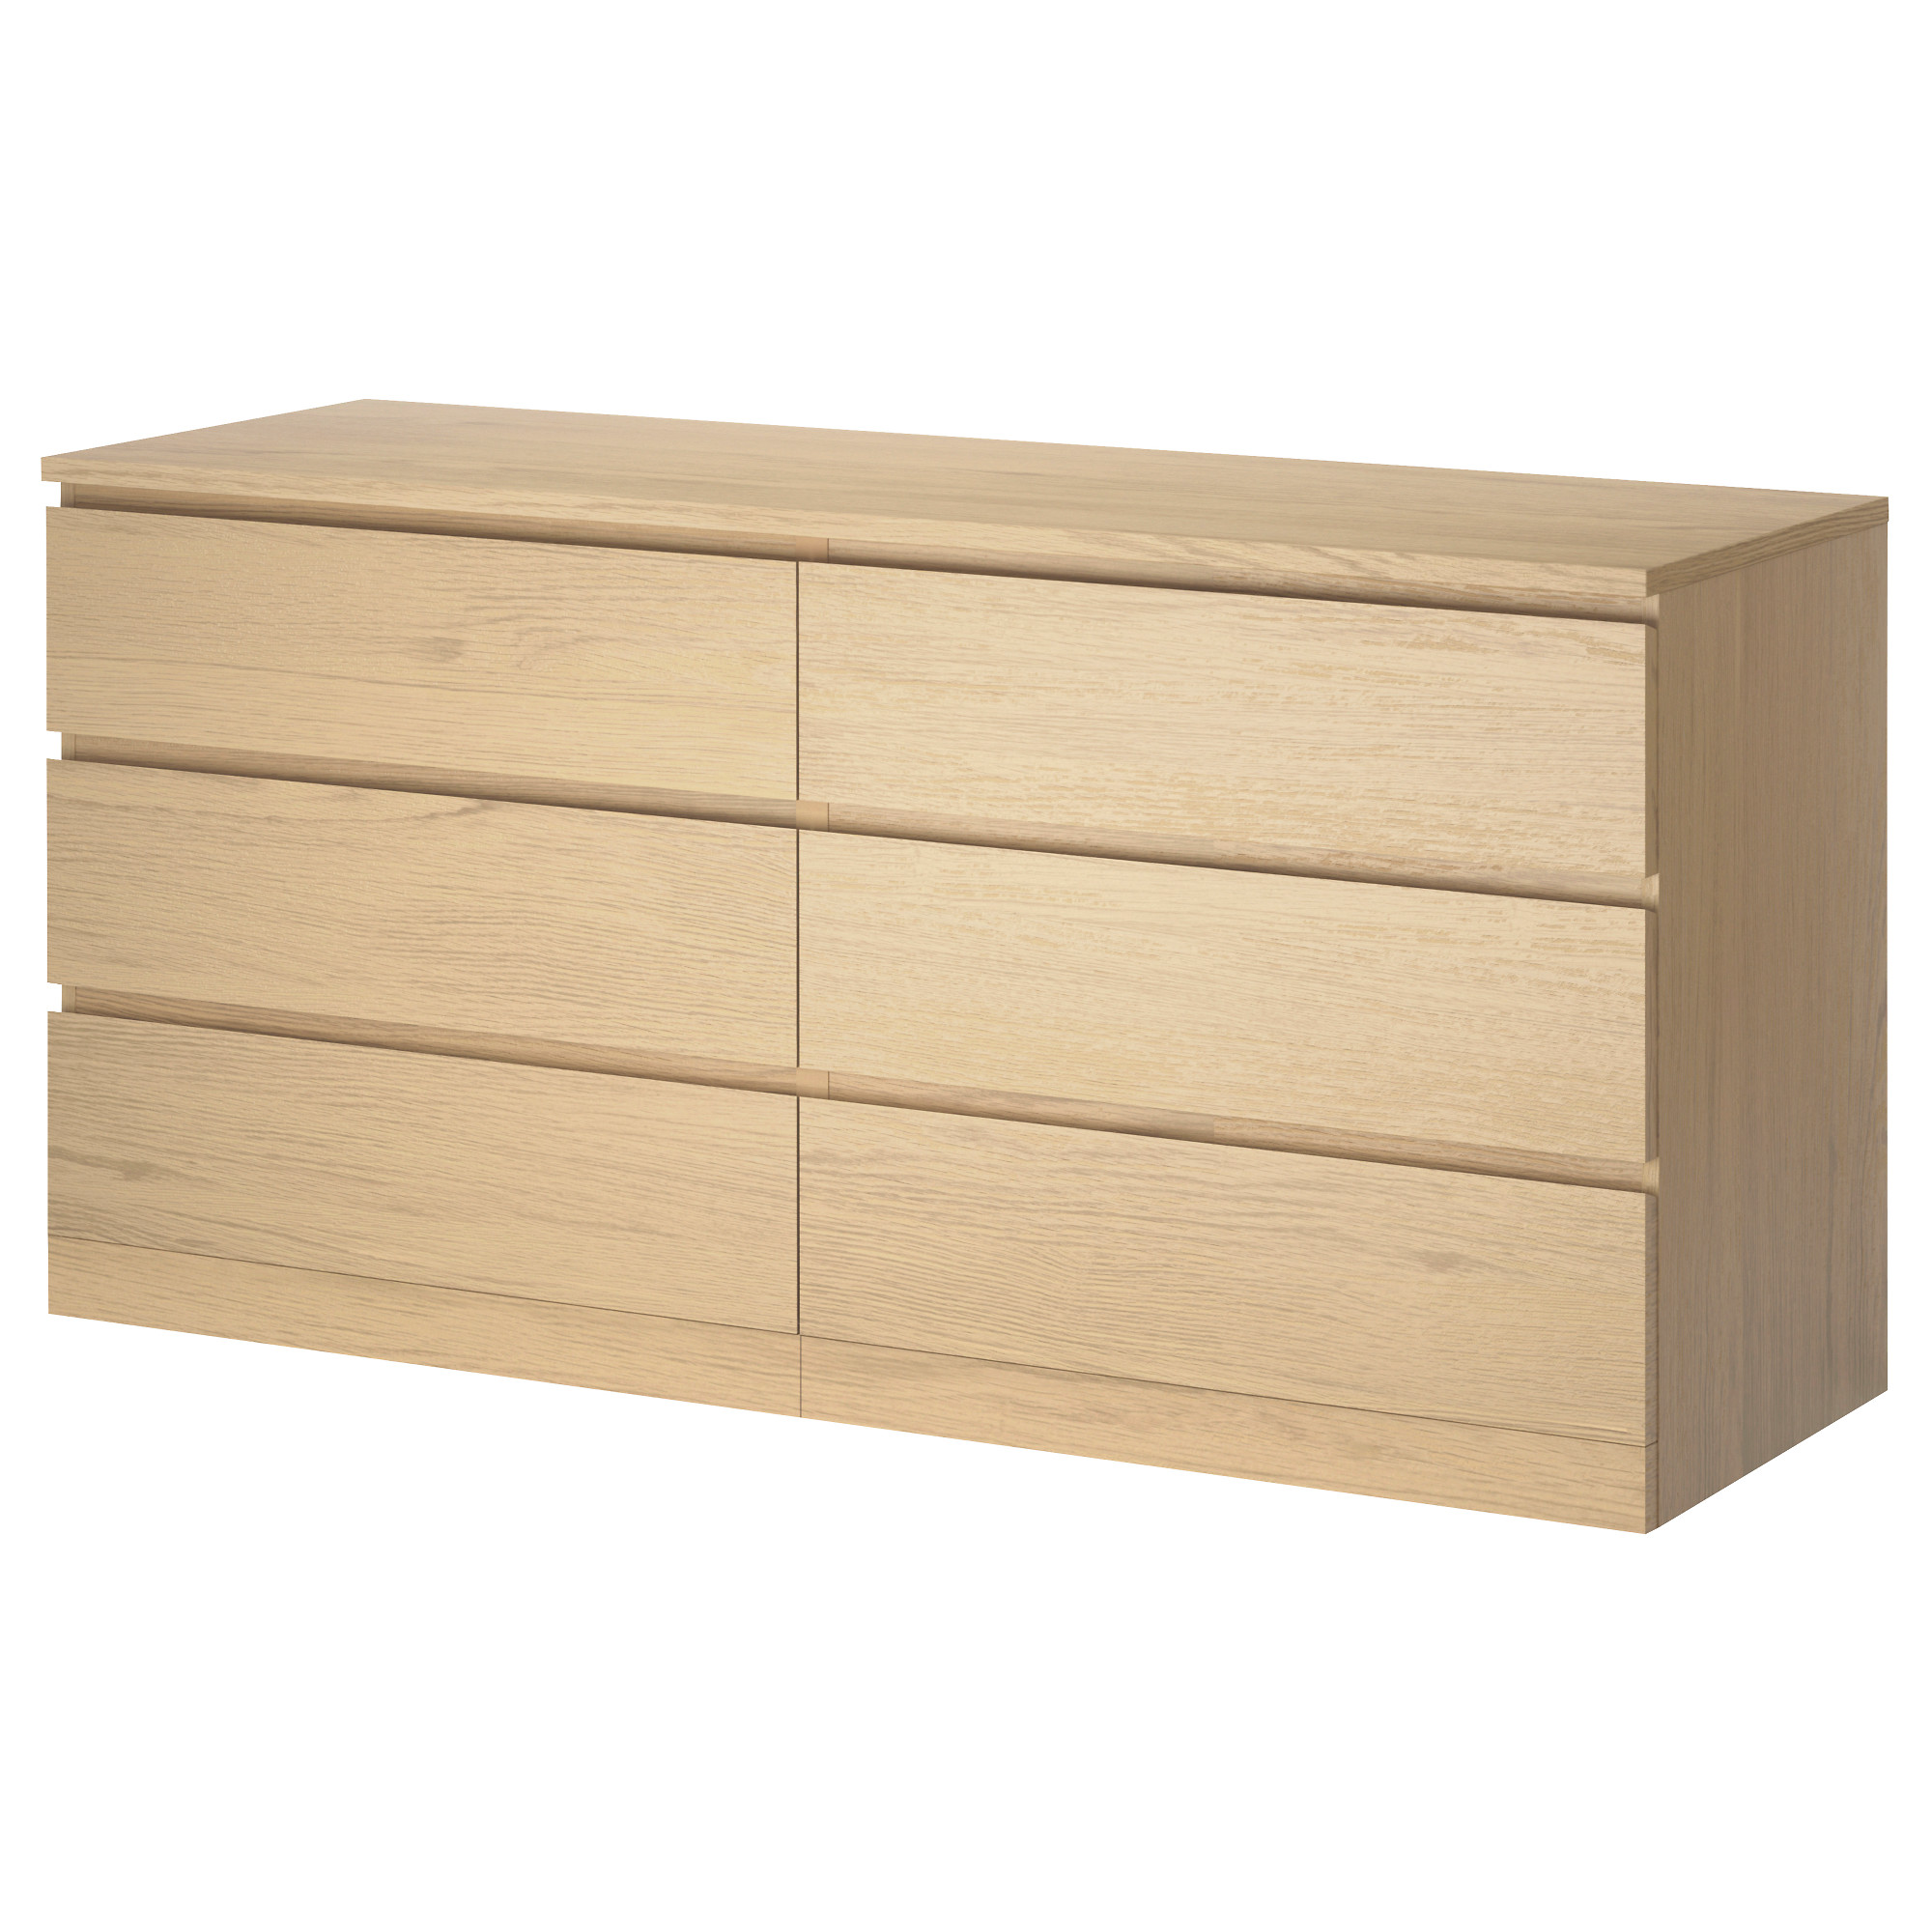 Malm Chest Of 6 Drawers White Stained Oak Veneer Ikea Hong Kong